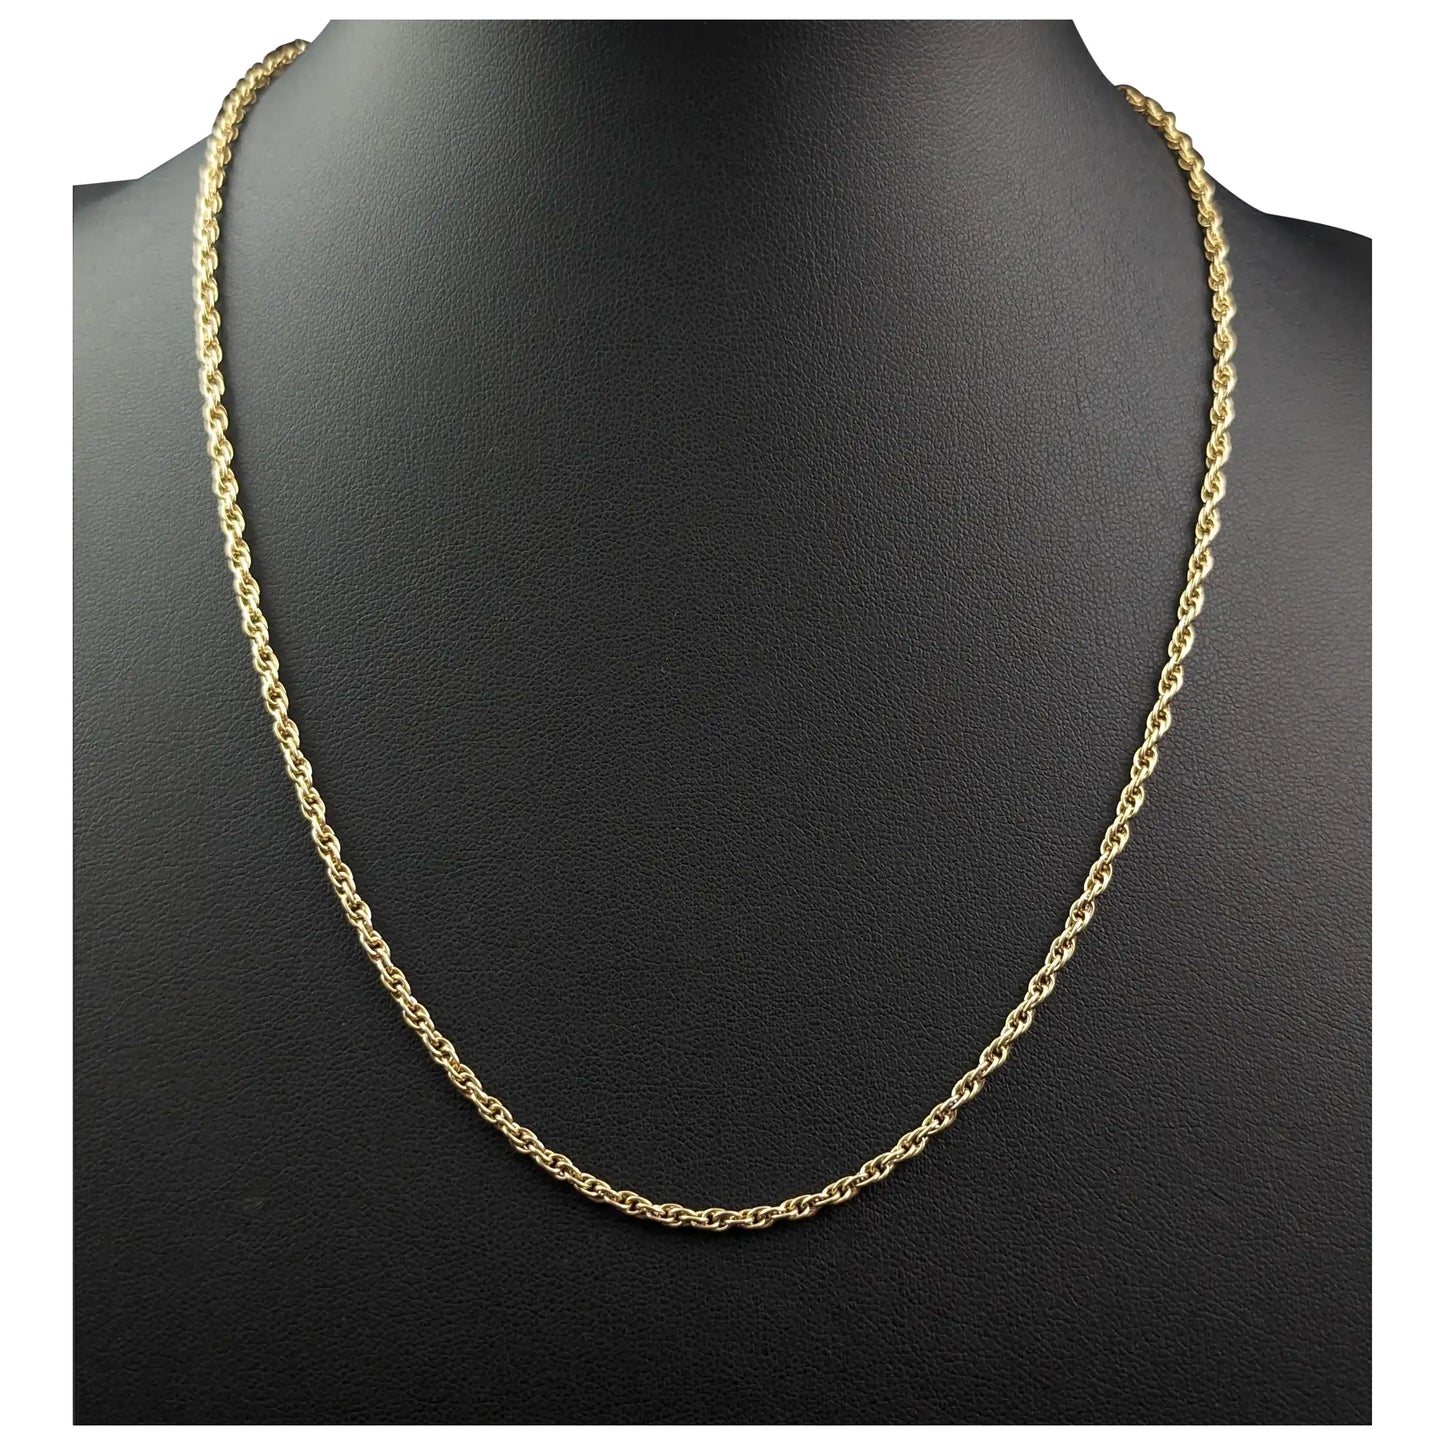 Vintage 9ct yellow gold fancy link chain necklace, Spiga link